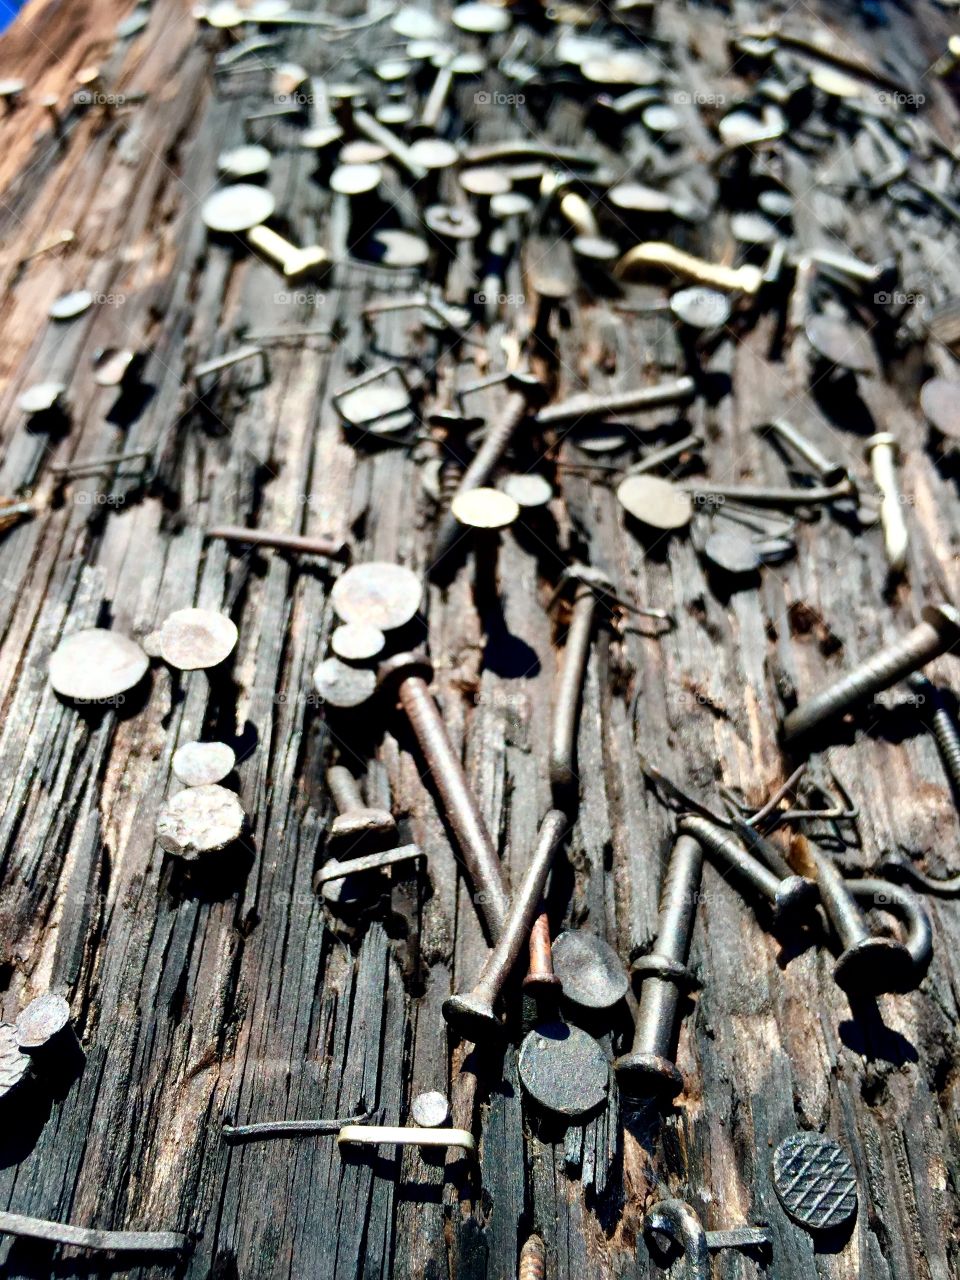 A myriad of nails and staples in a telephone pole. 